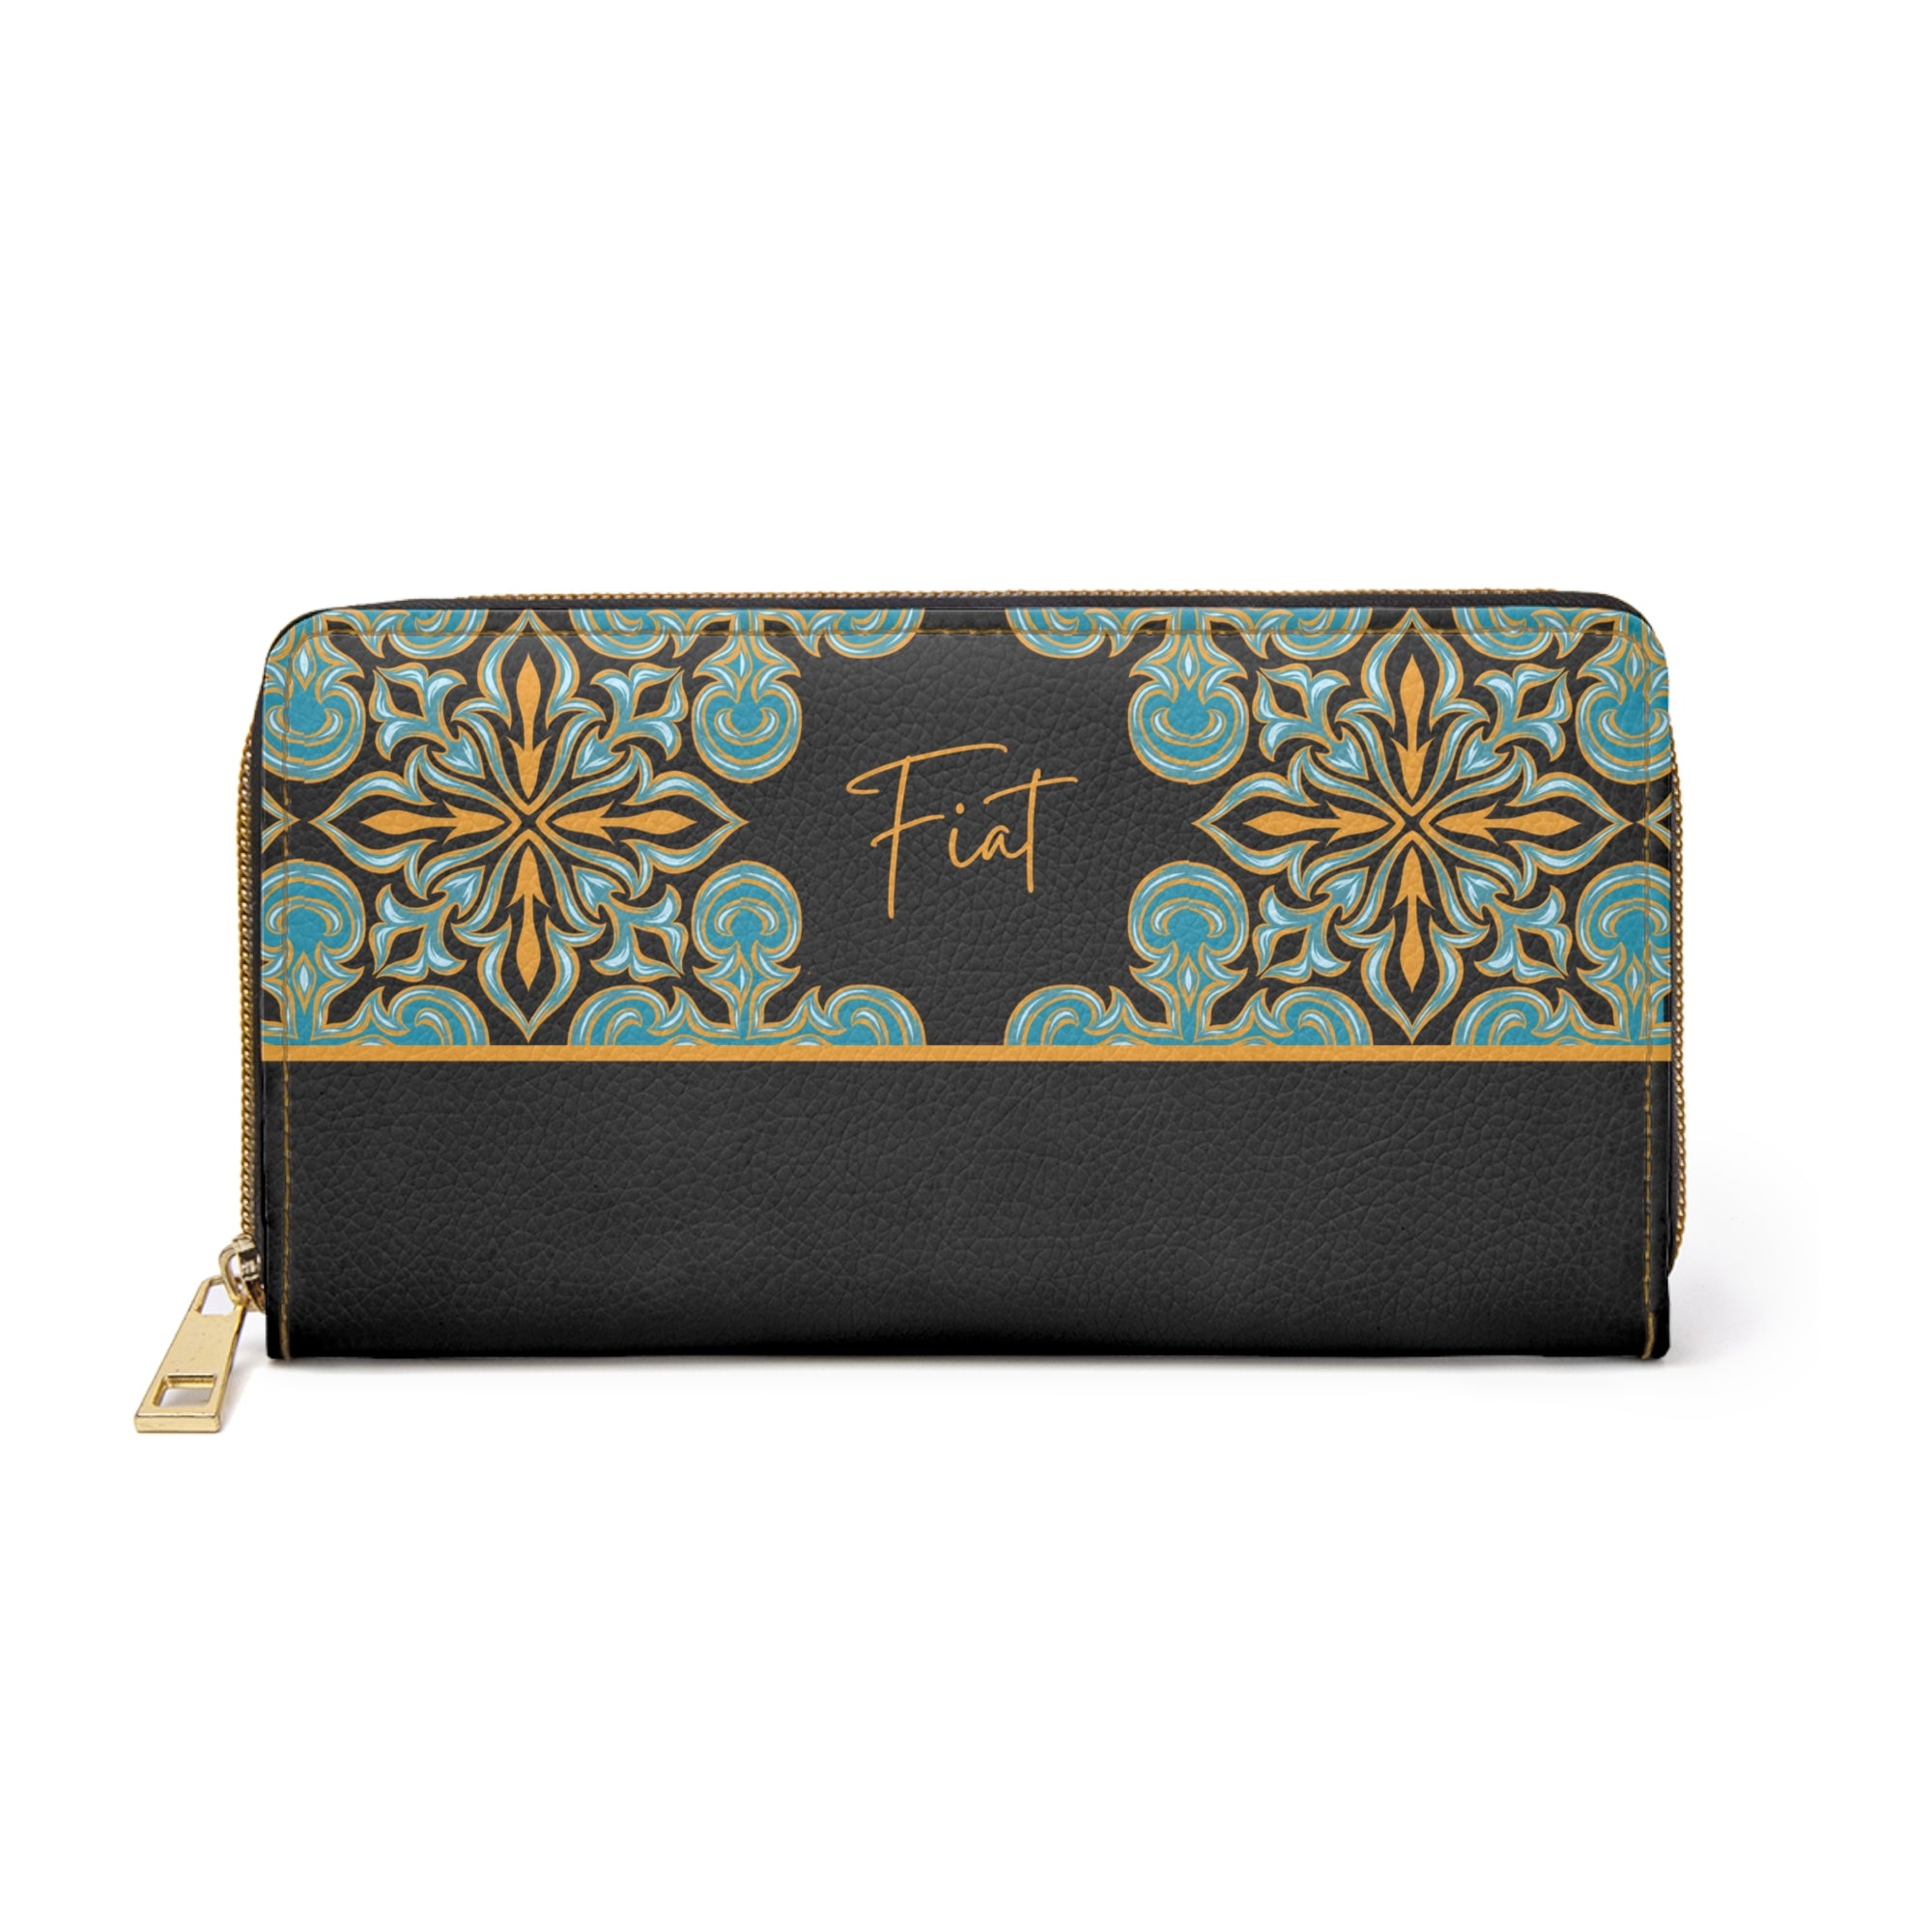 Our Lady of Guadalupe Fiat Zipper Wallet (Vegan Leather)